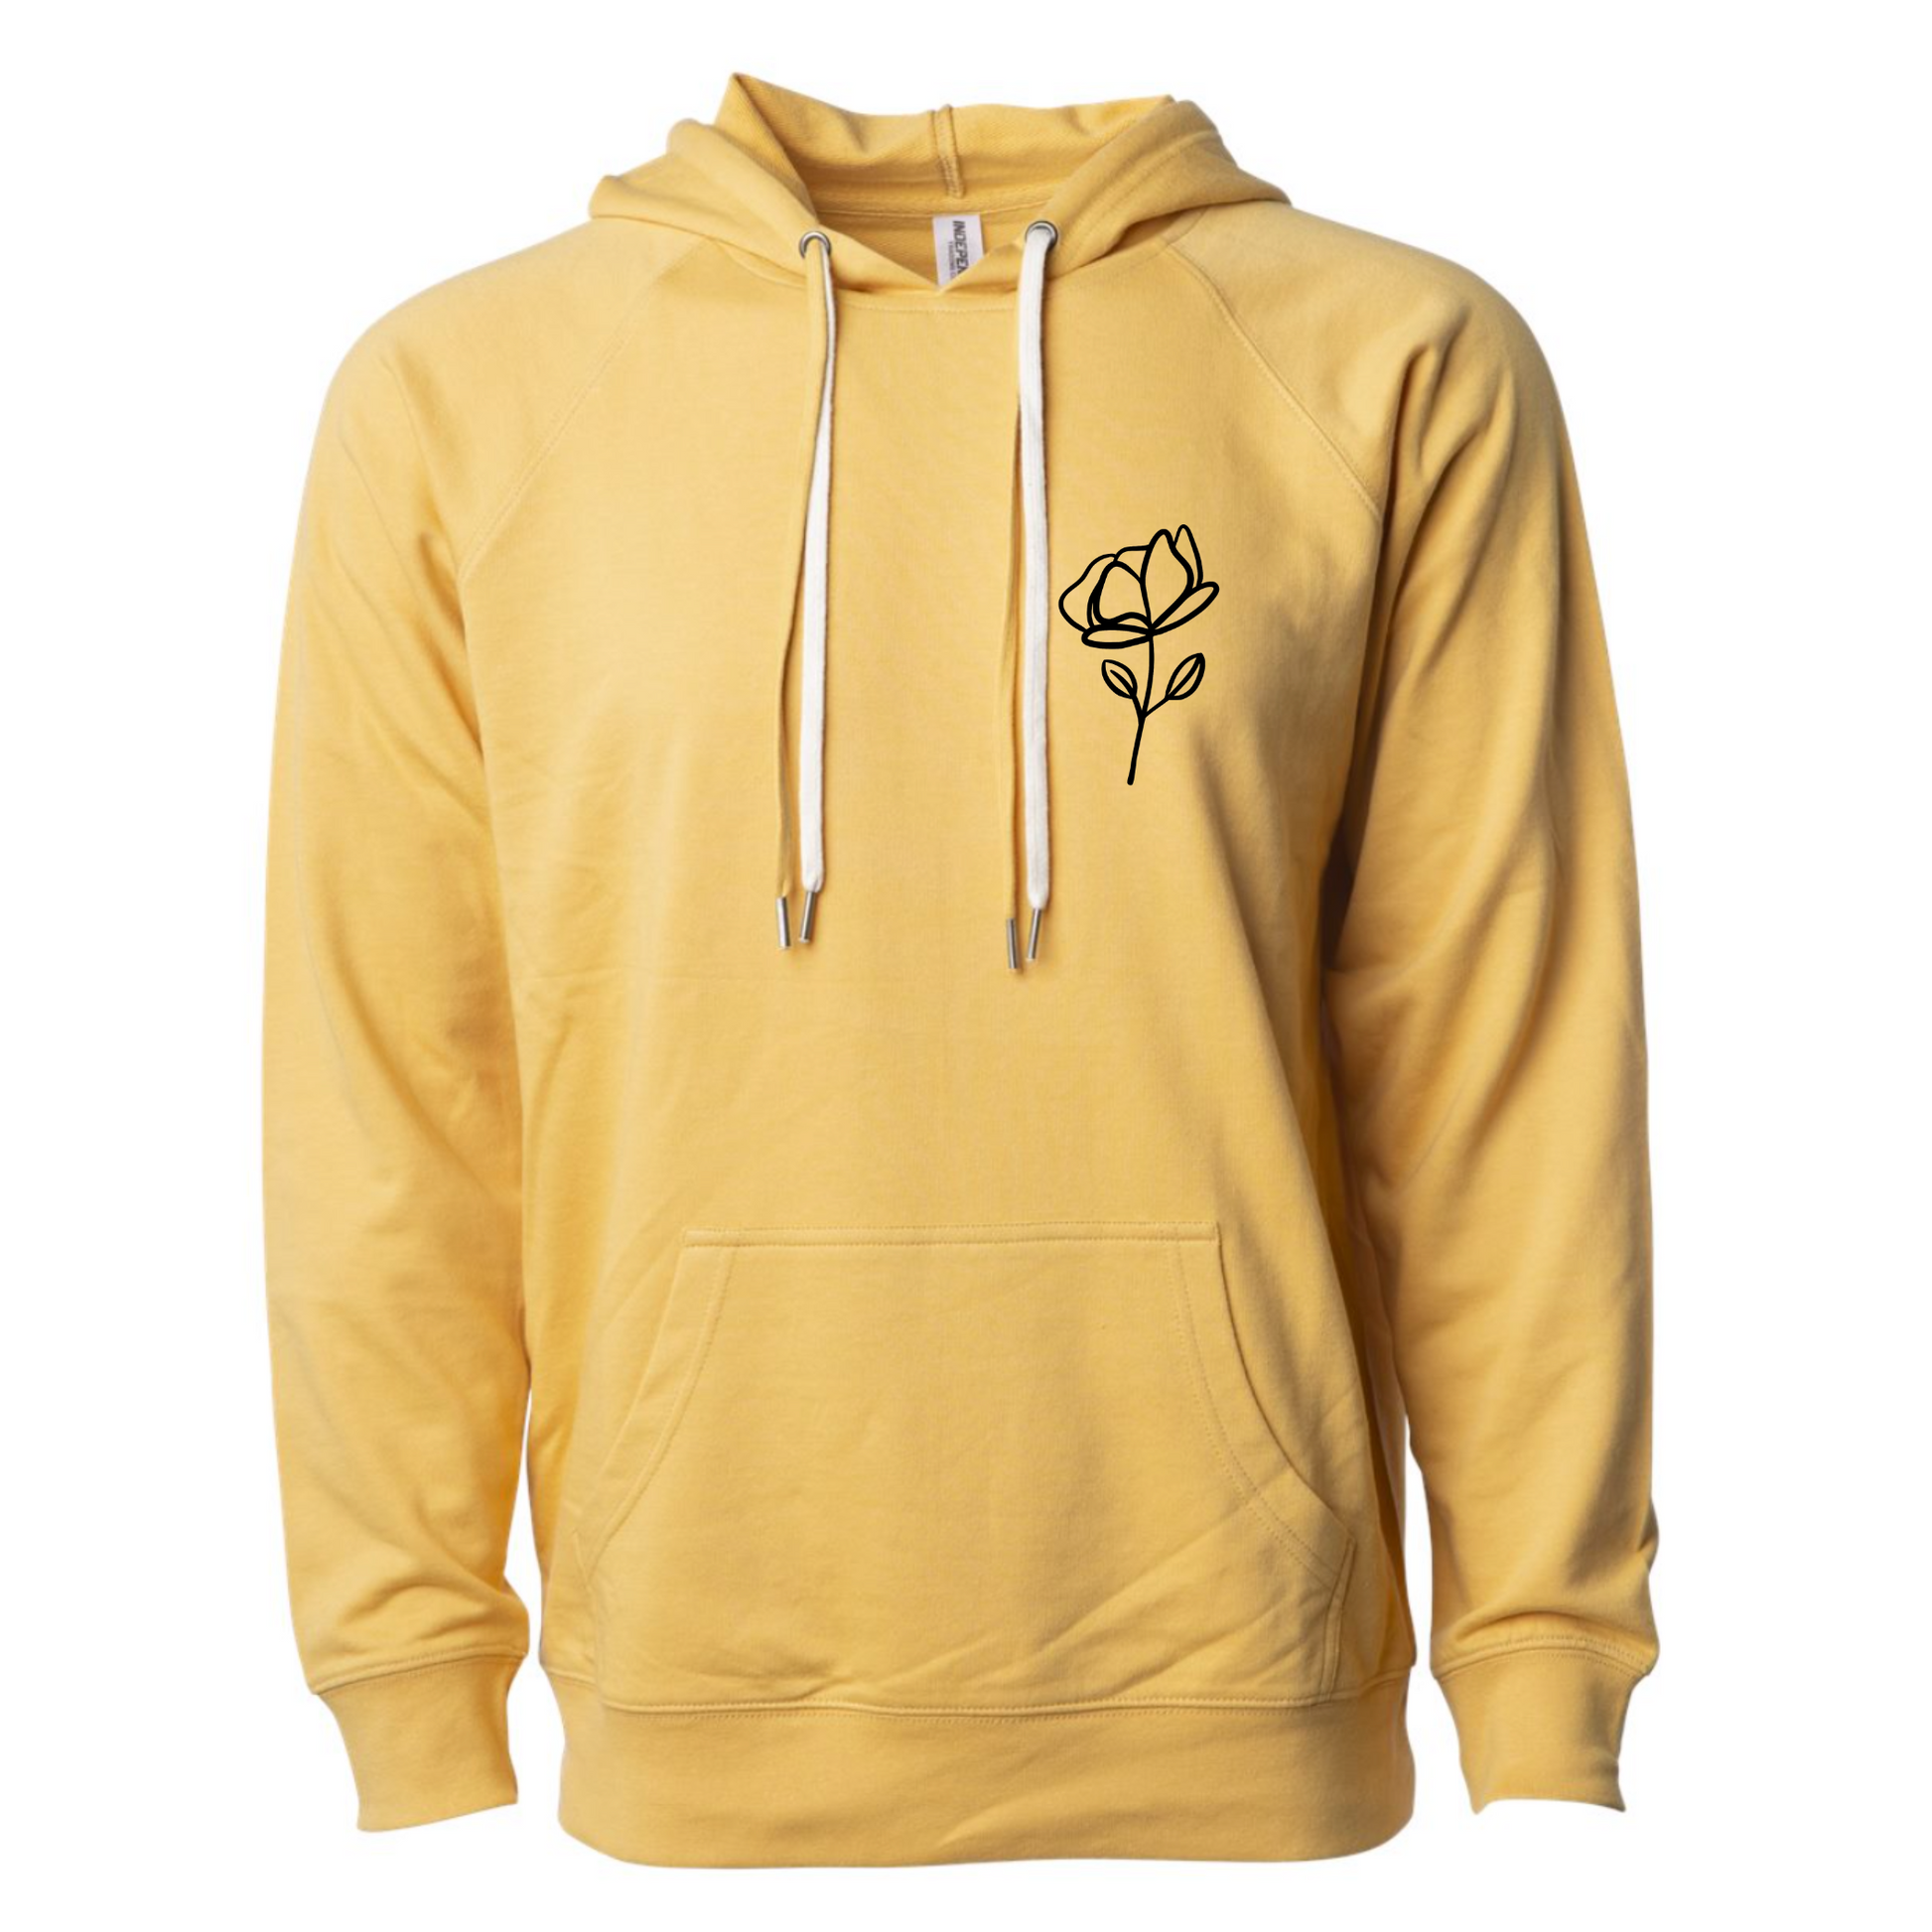 Be The Change Hooded Sweatshirt in a light yellow. The back has a black cursive writing saying "be the change you wish to see in the world." The front has a small flower with stem in black - pocket style. This is the front view of the sweatshirt.